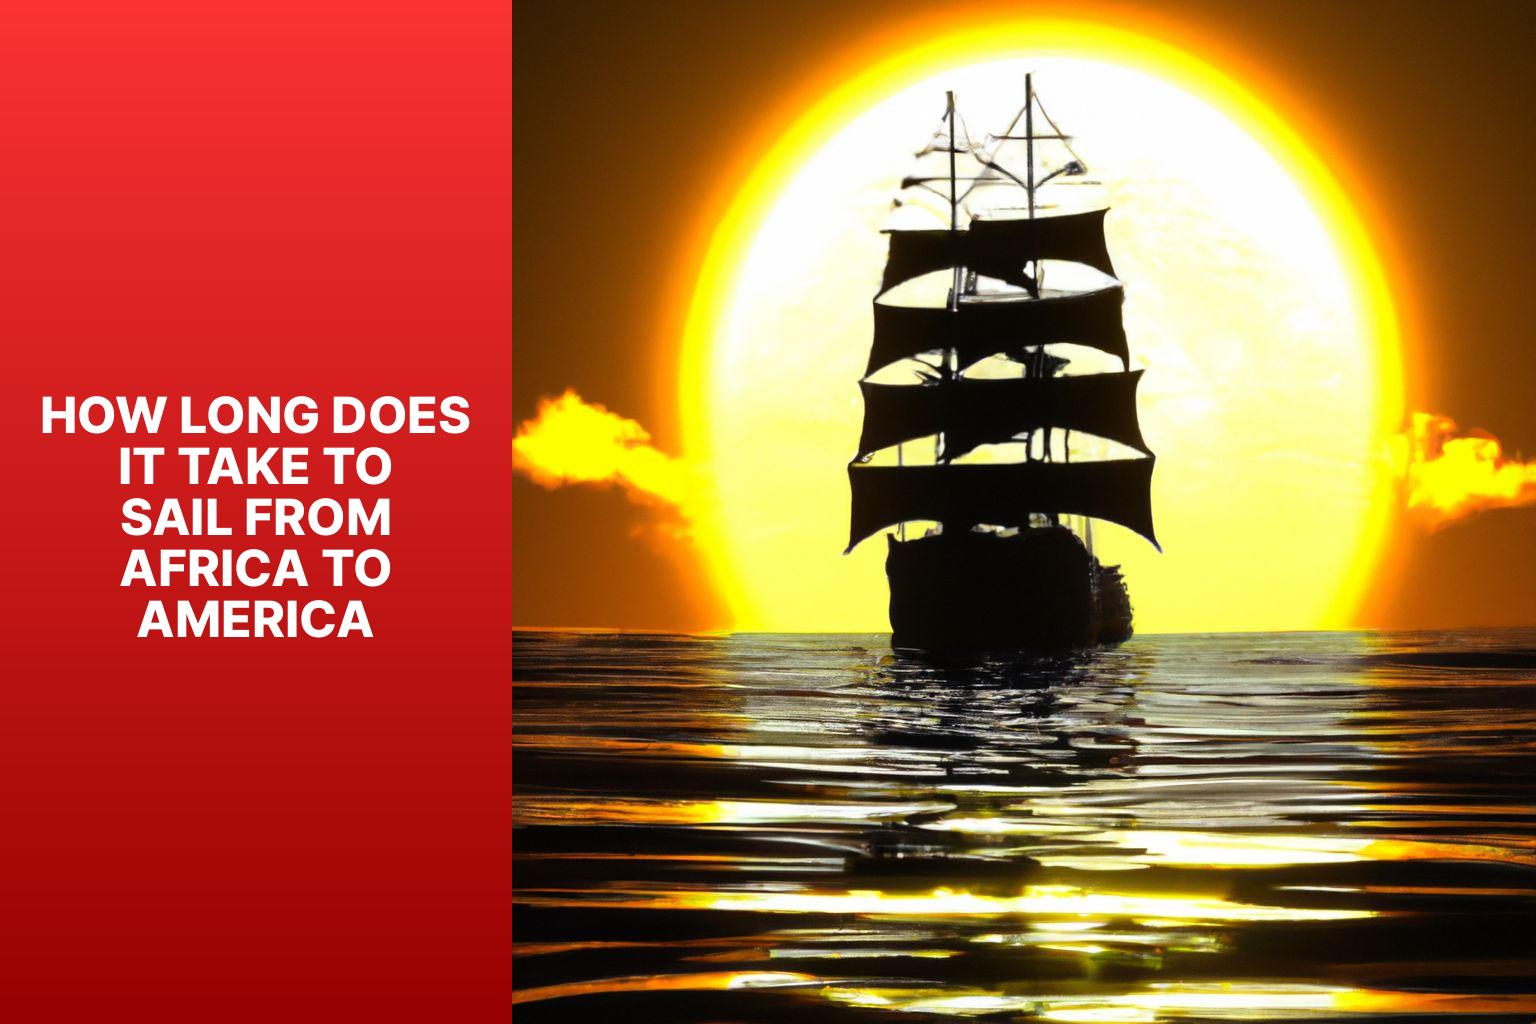 Sailing from Africa to America: How Long Does It Take?